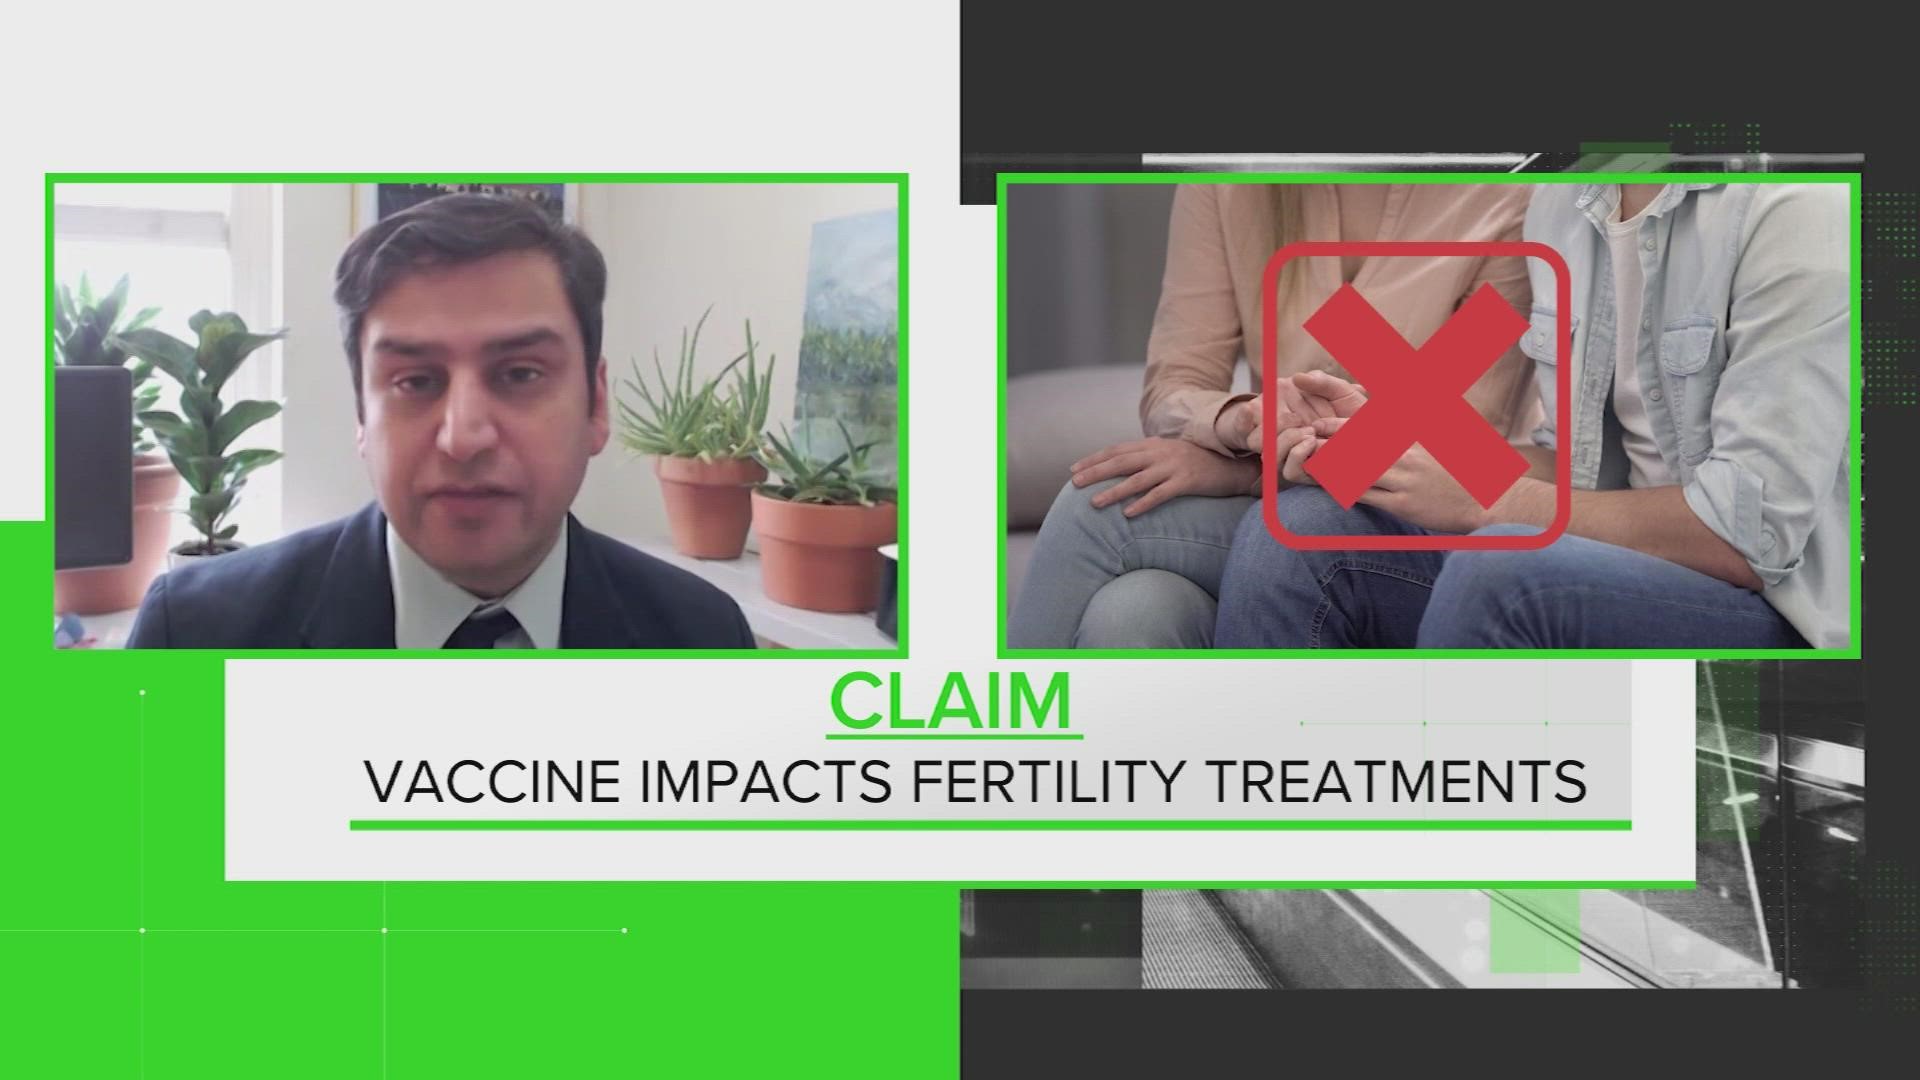 Dr. Amesh Adalja says there is no evidence that the vaccine poses any risk to a developing fetus.